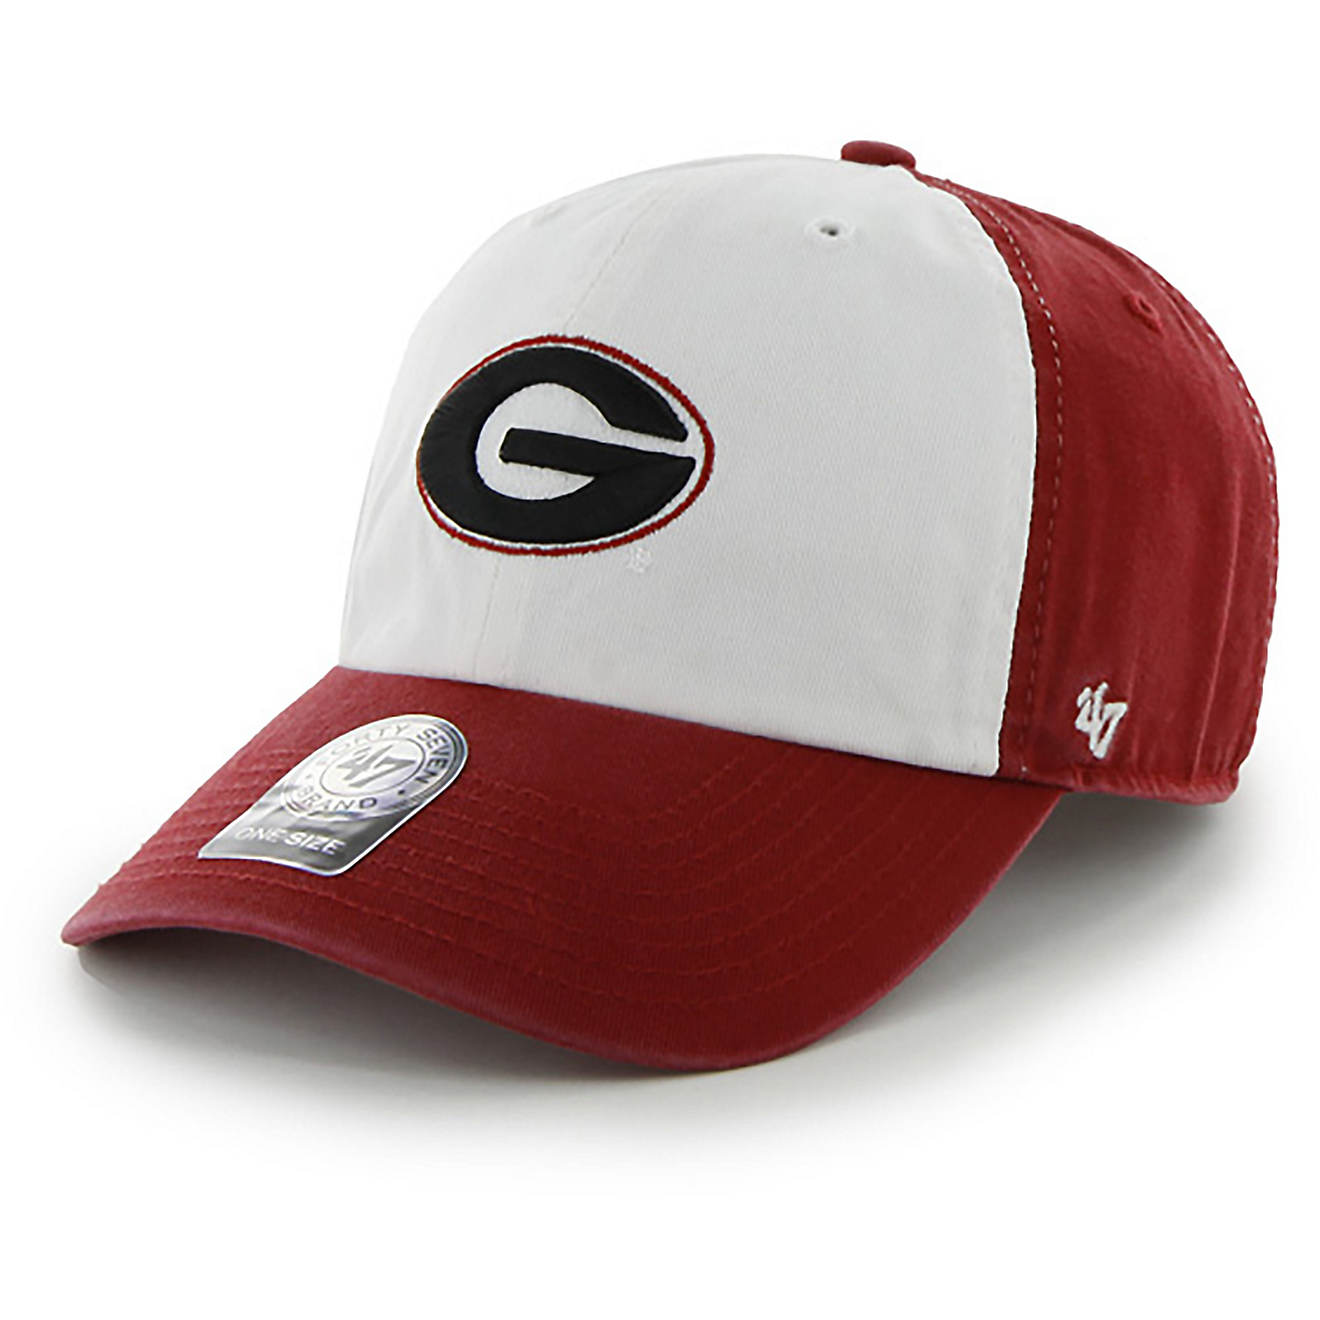 '47 Youth University of Georgia Freshman Clean Up Cap                                                                            - view number 1